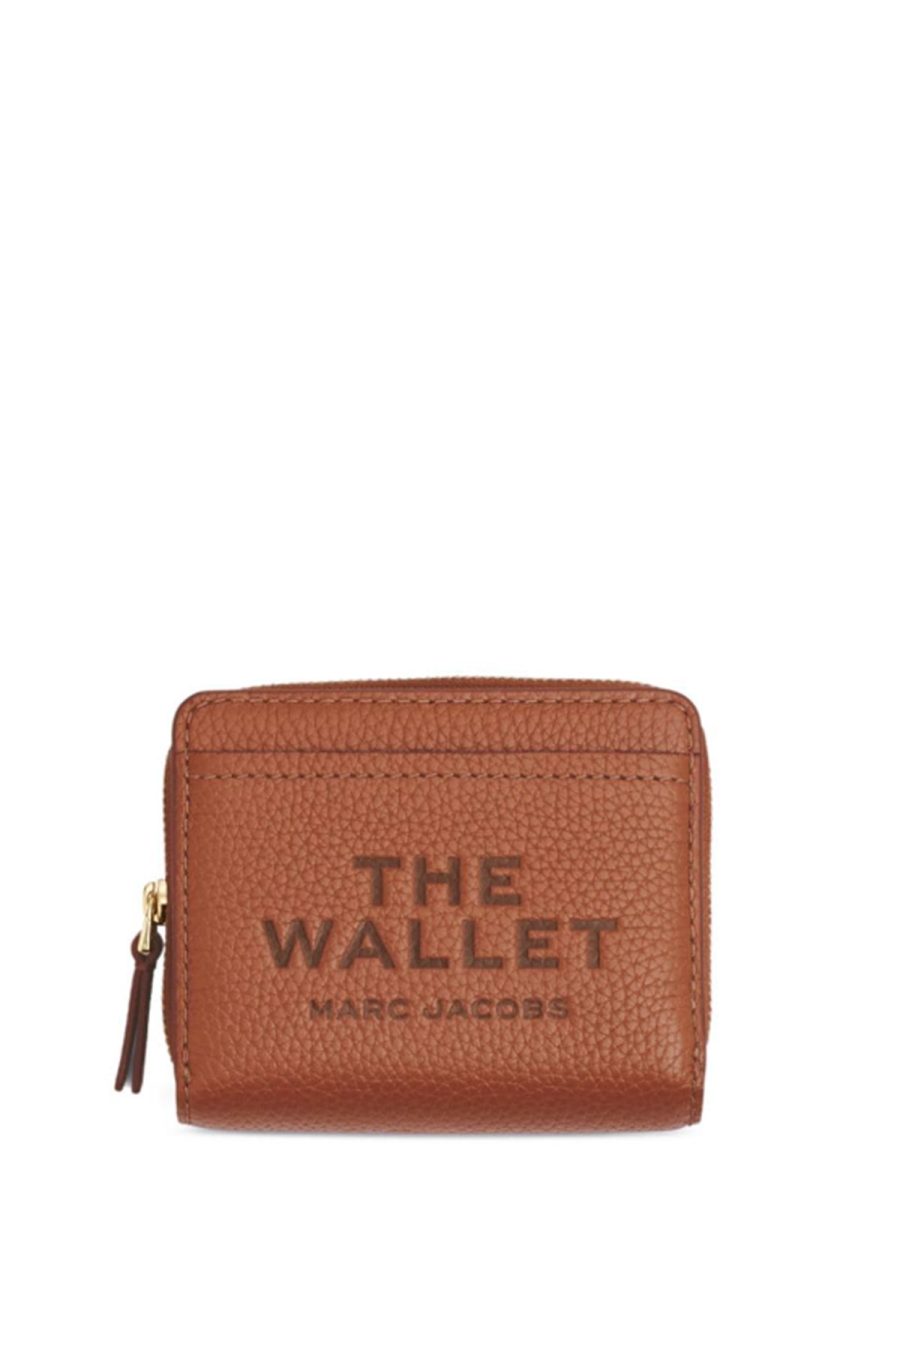 Marc Jacobs Wallets Brown